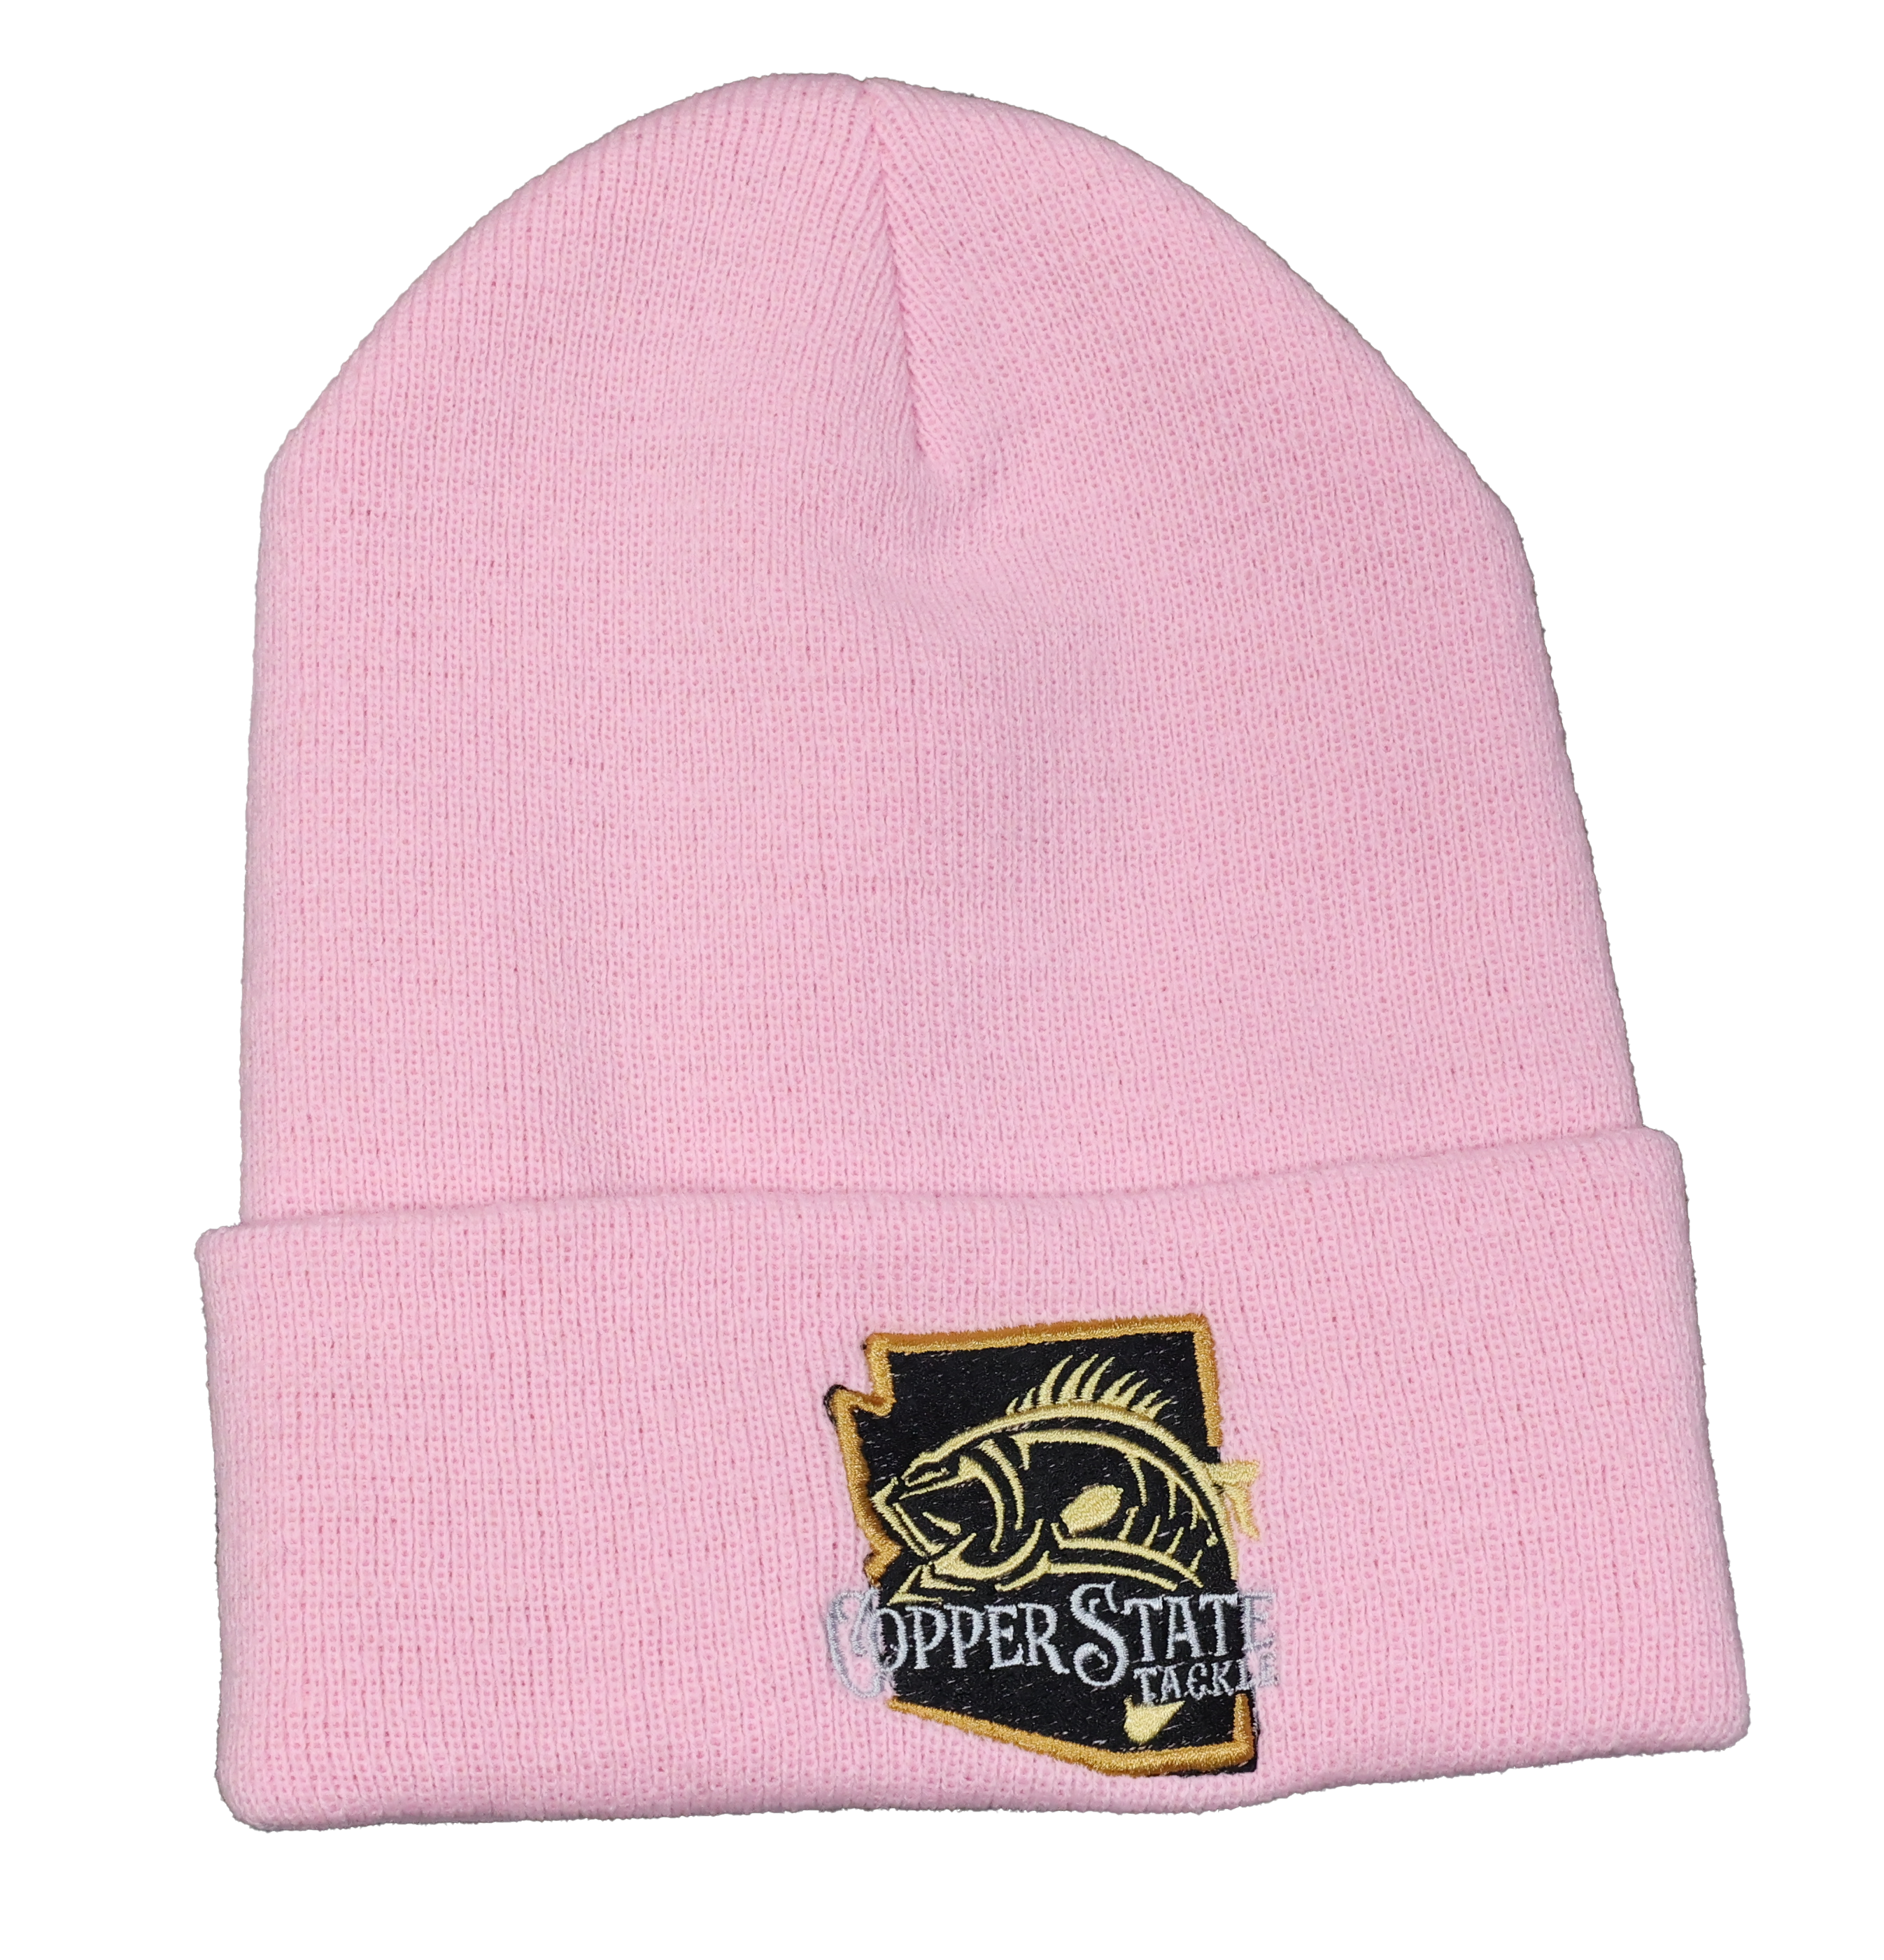 COPPERSTATE TACKLE BEANIE HAT - 0